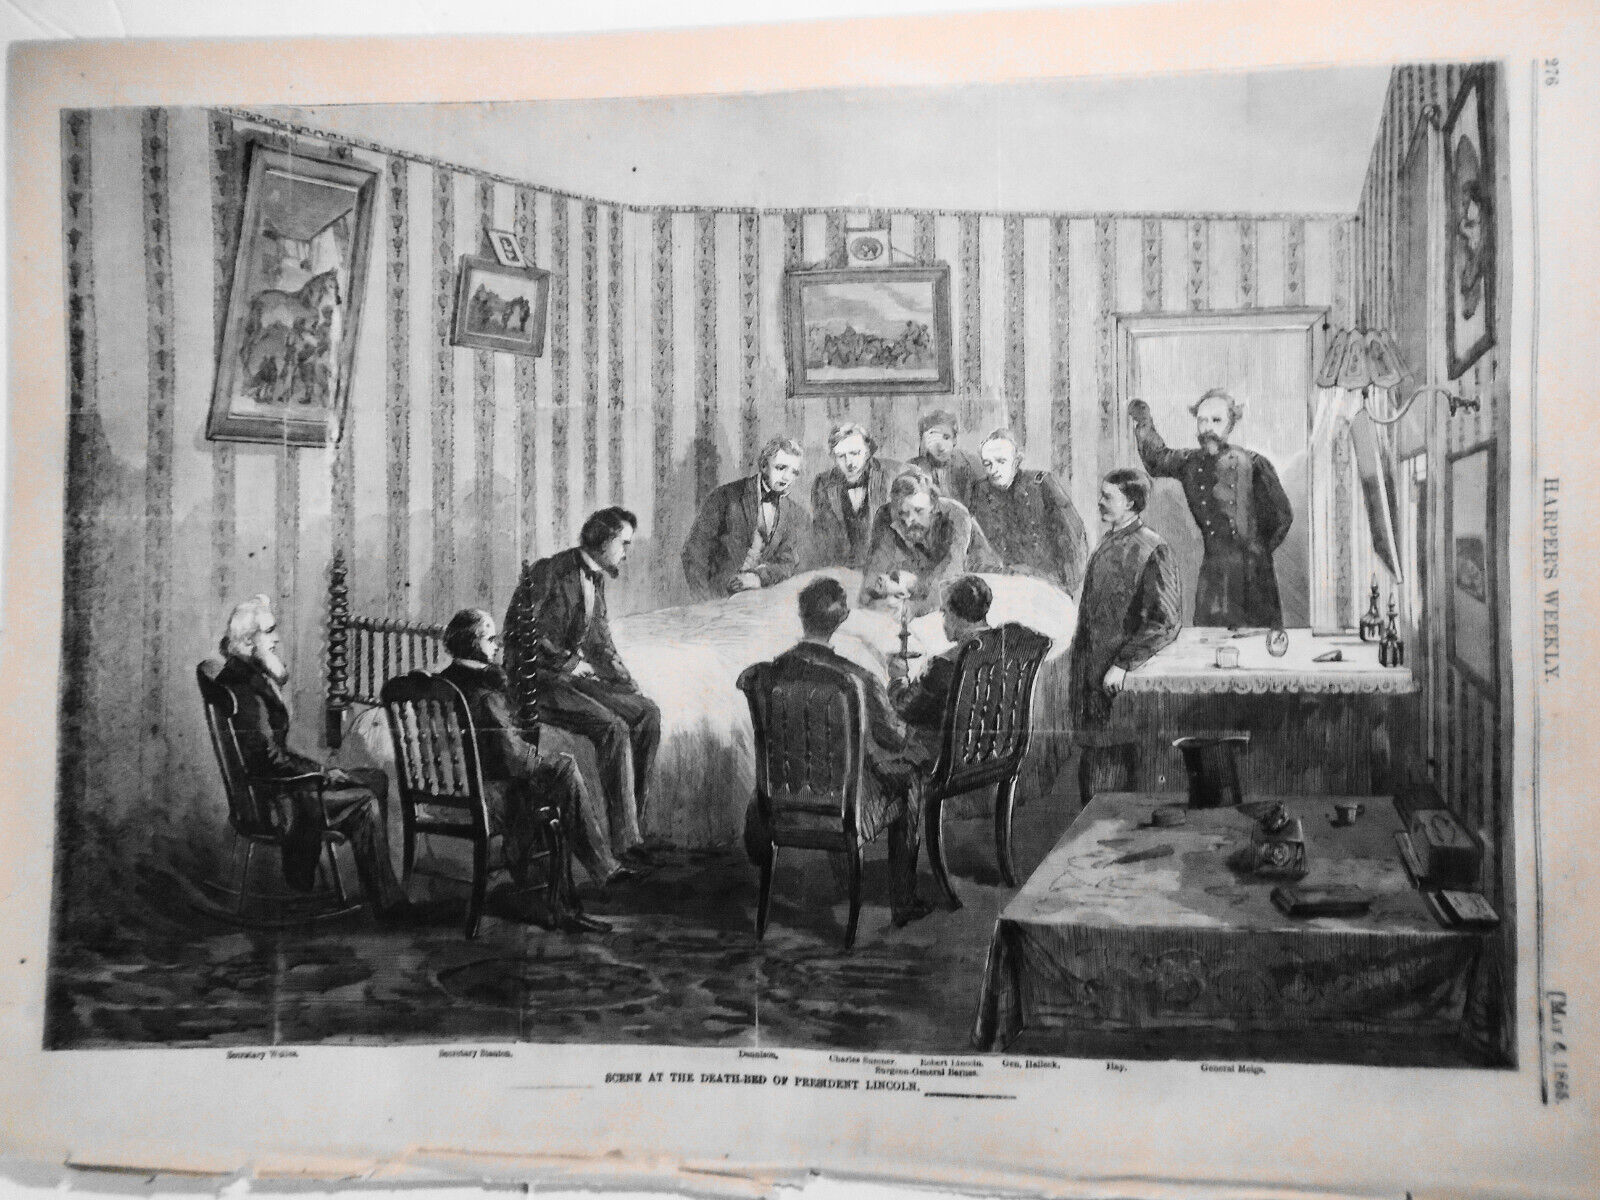 Scene At The Death-Bed of President Lincoln Harper's Weekly May 6, 1865 Original